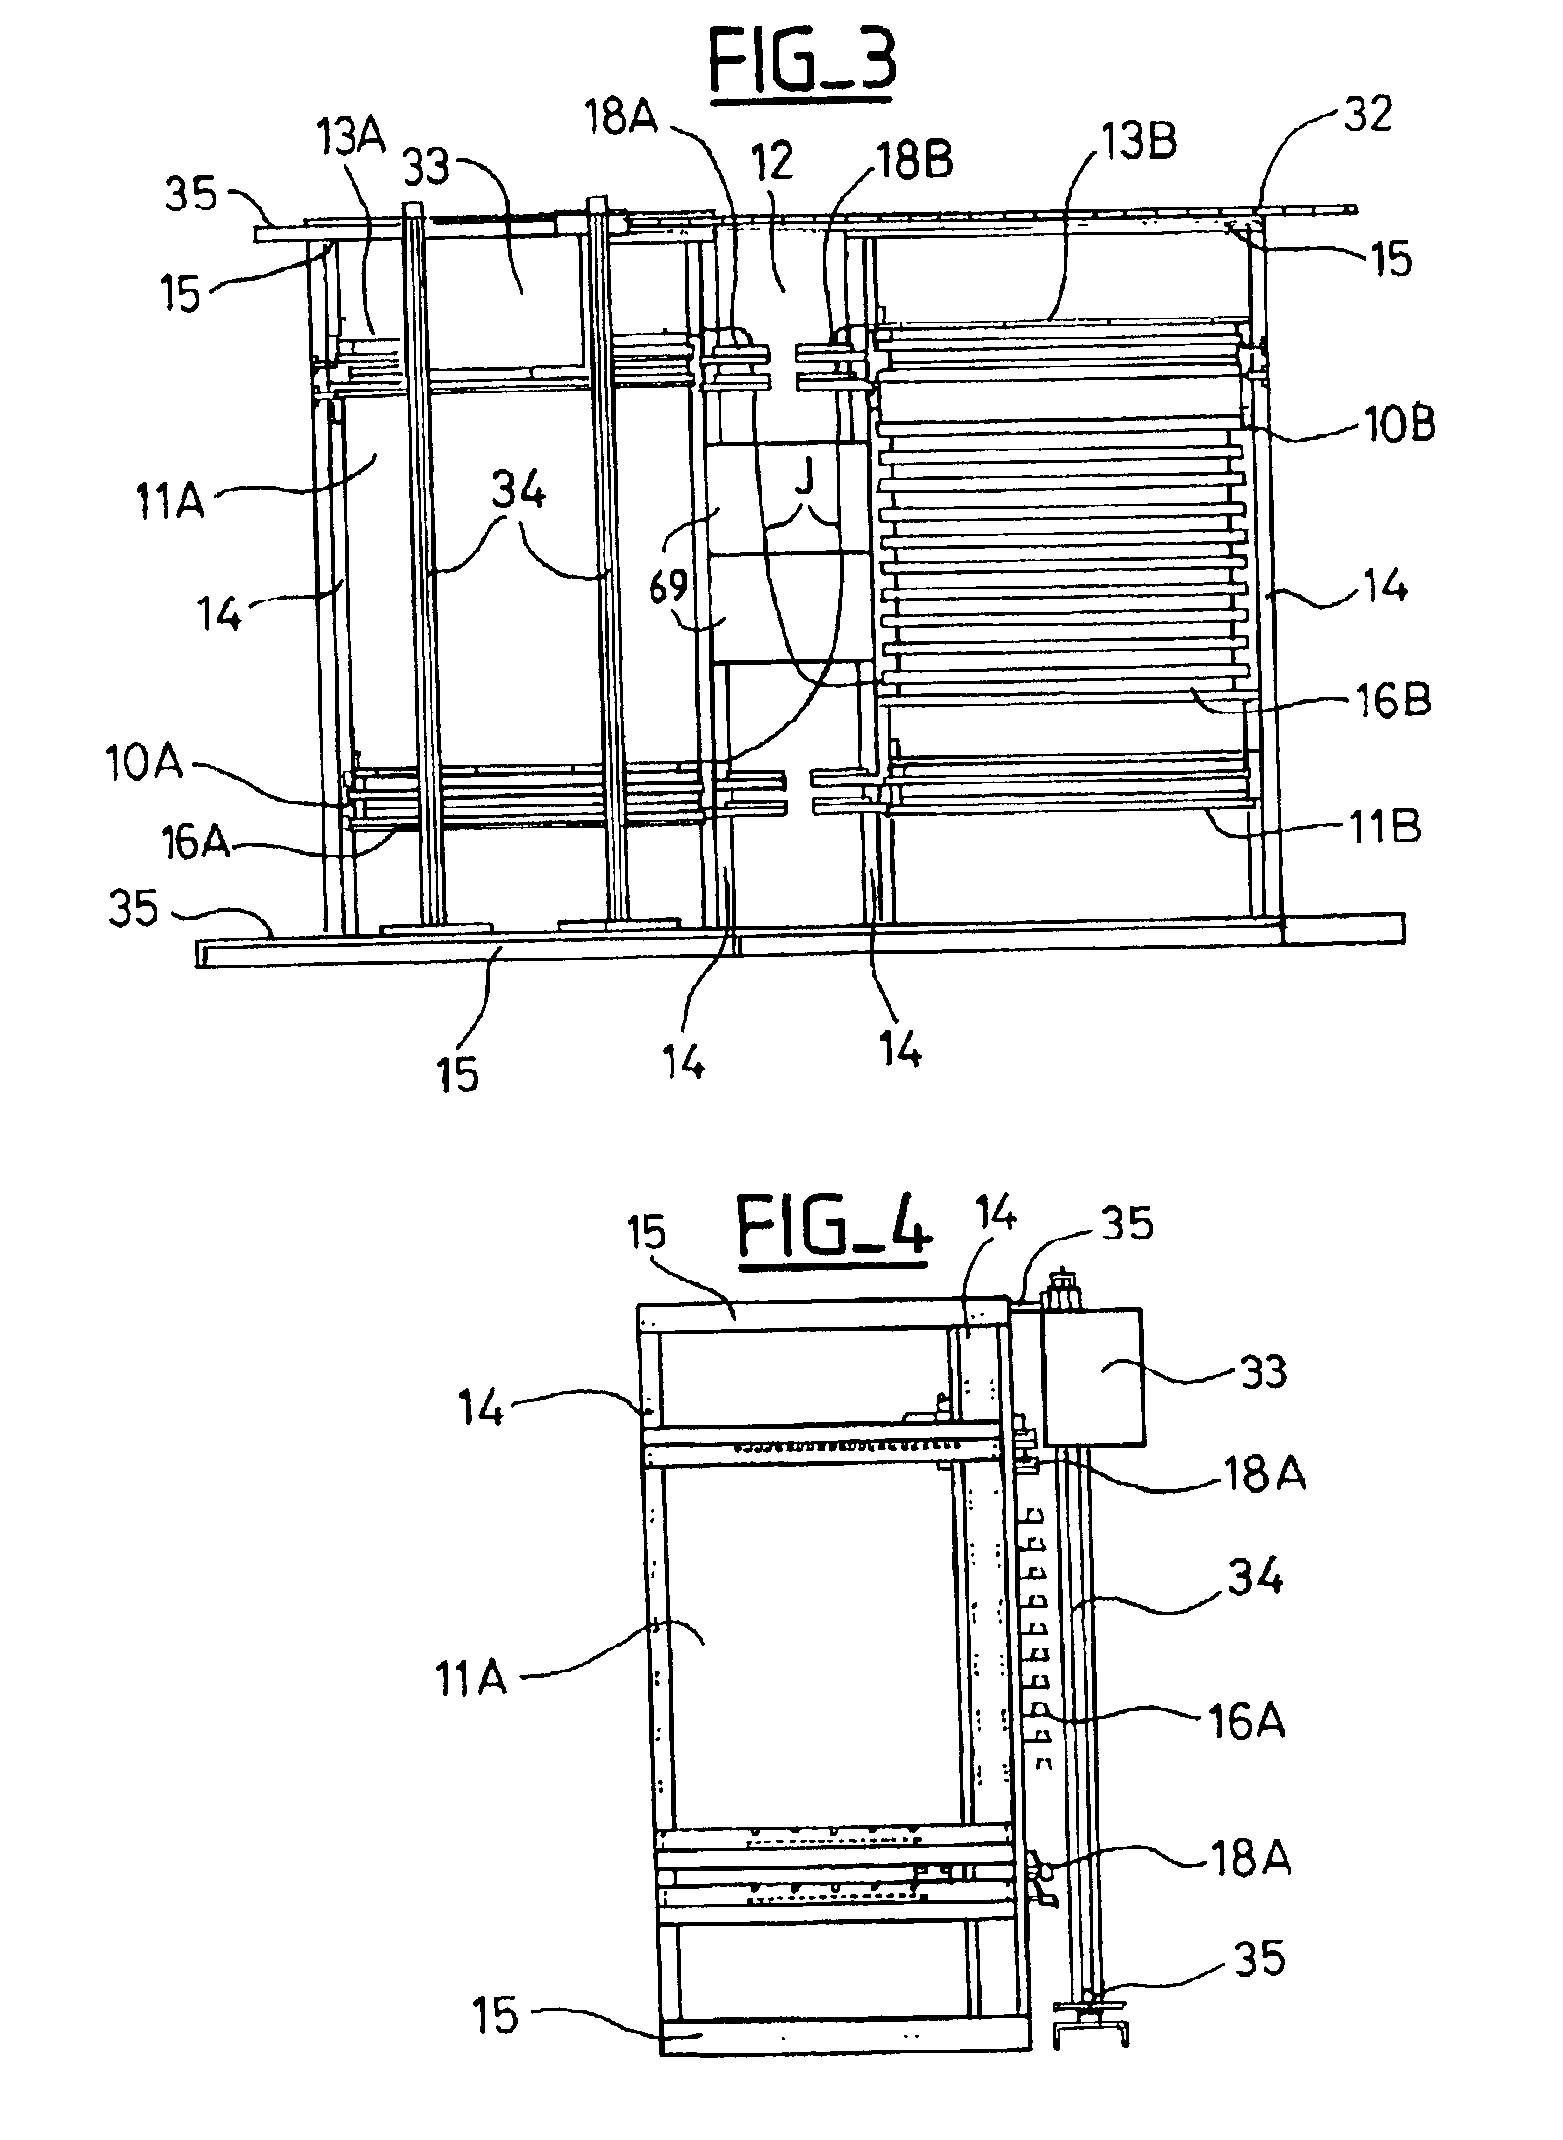 Optical high-density distribution frame and method for making jumper connections in such a distribution frame